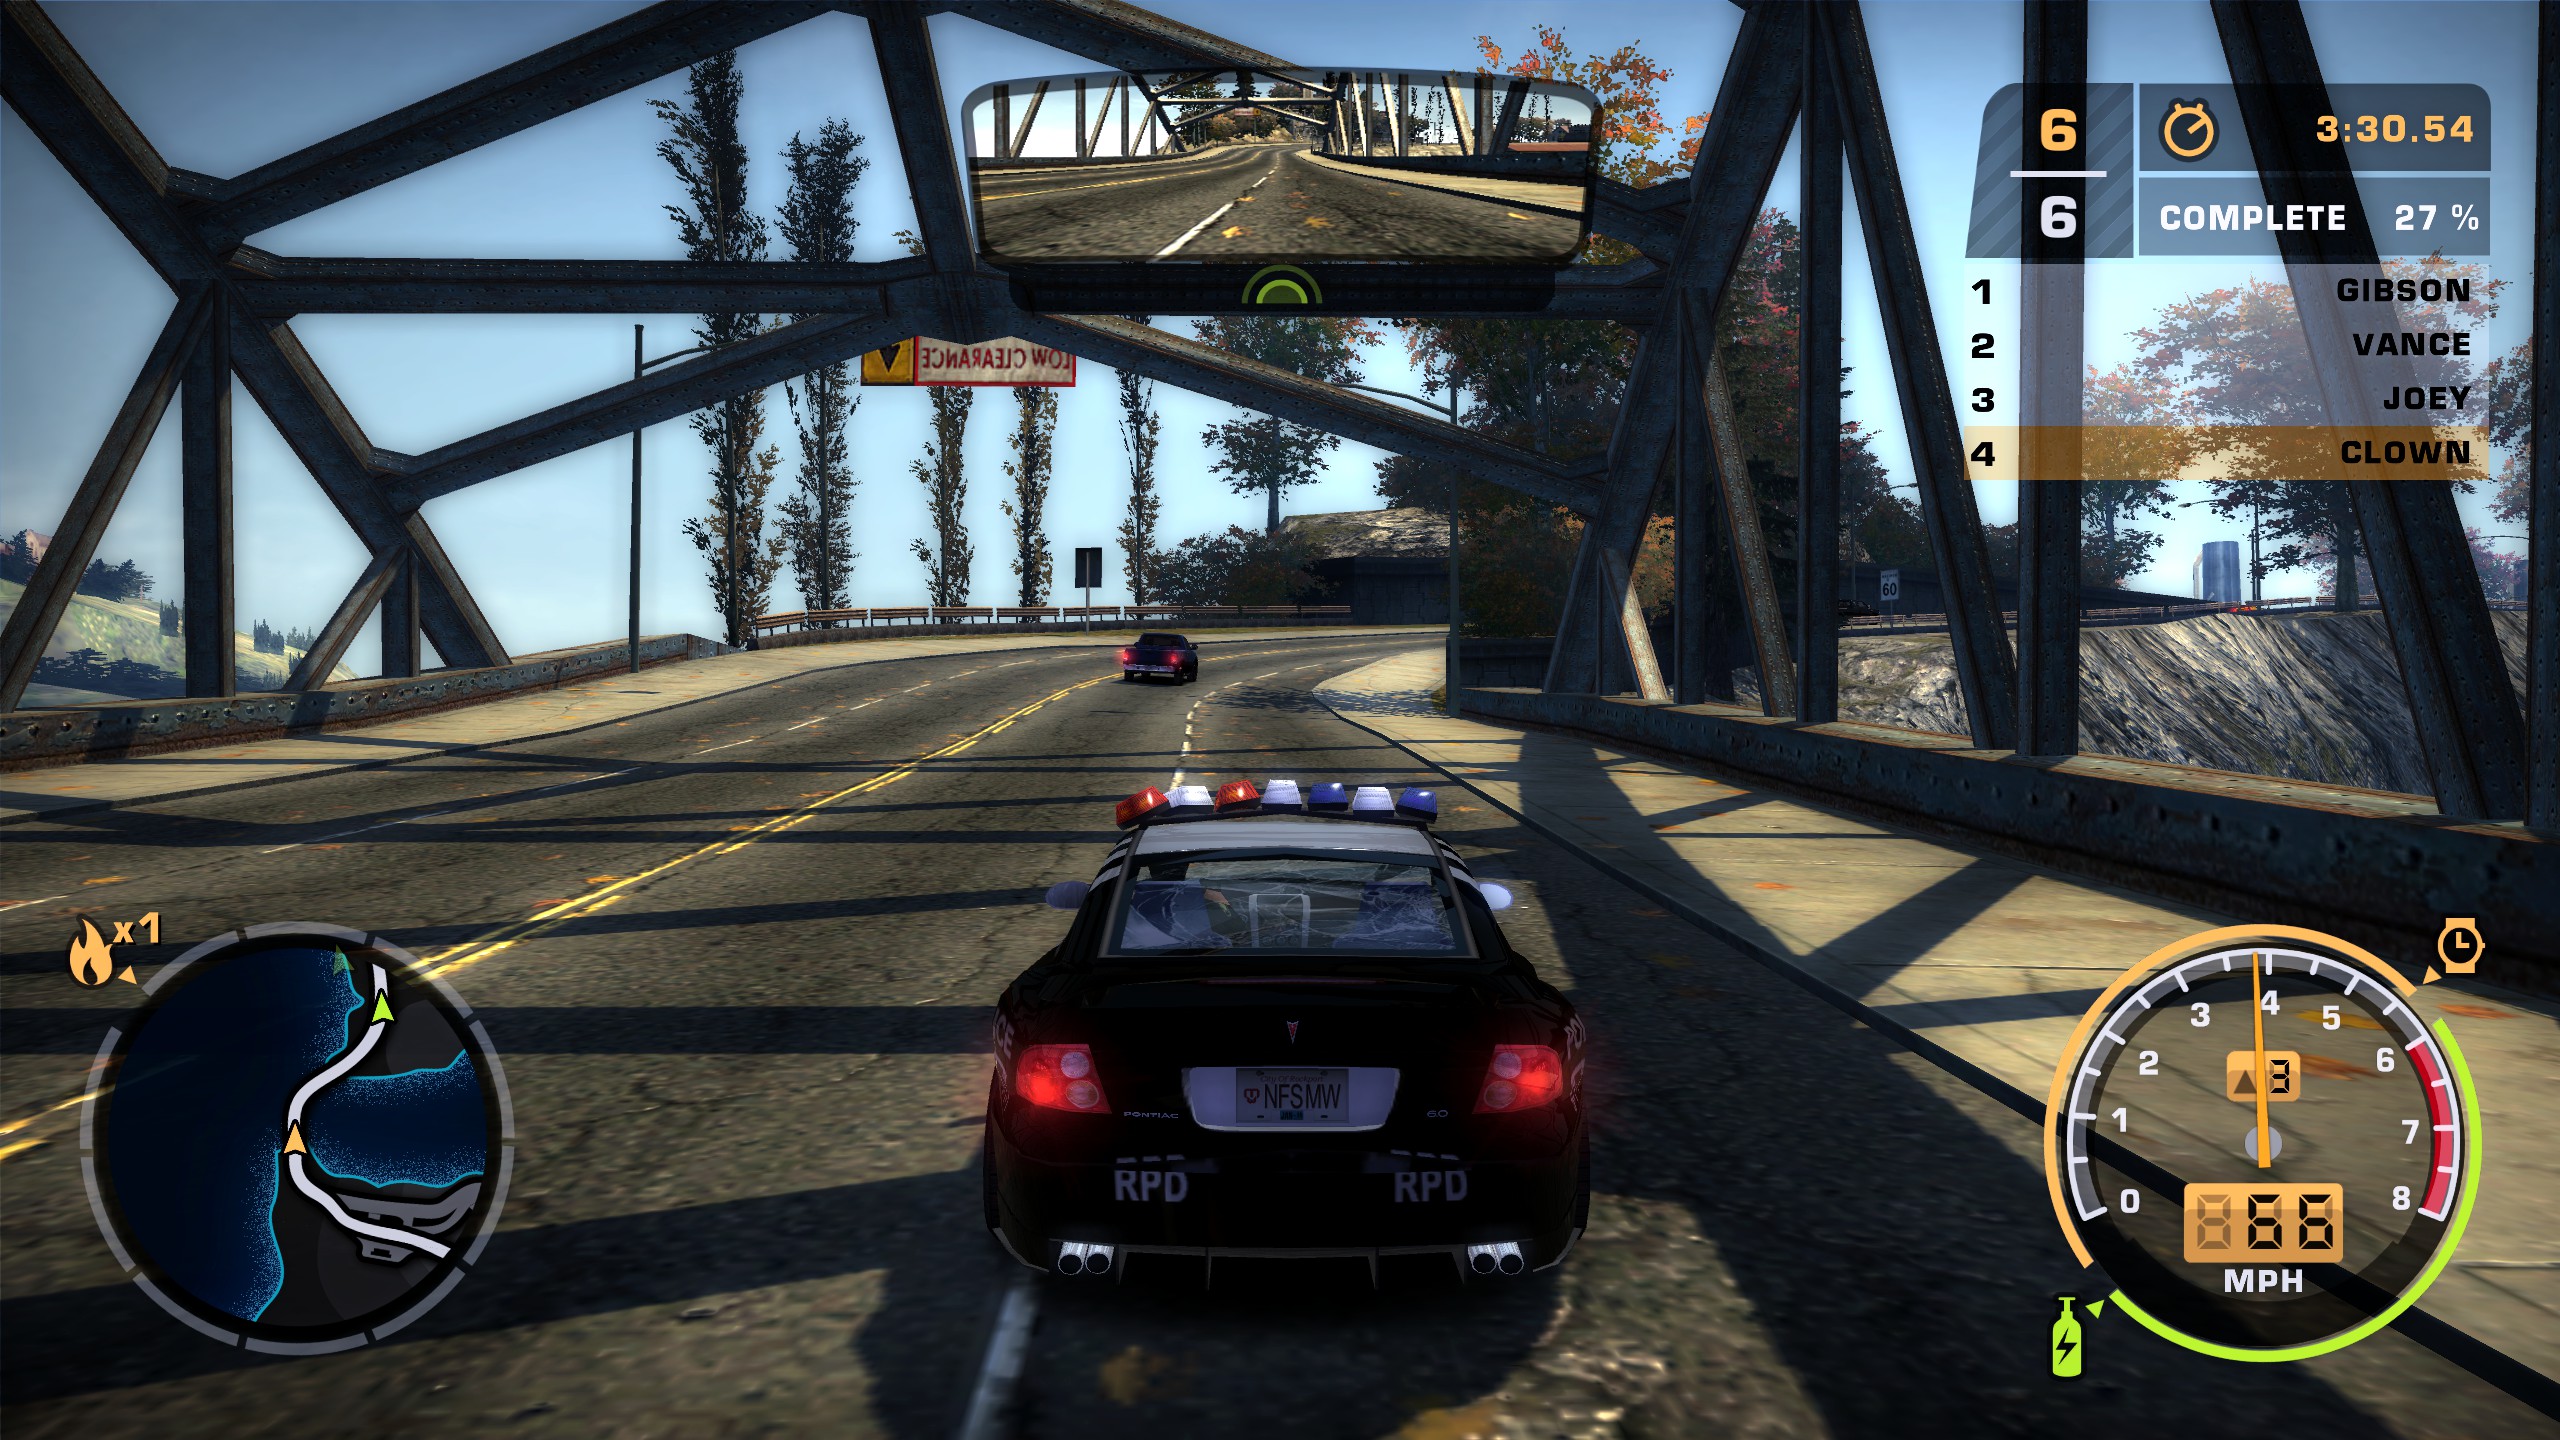 Steam Community :: Guide :: [ICC] NFS Most Wanted 2005 - Black